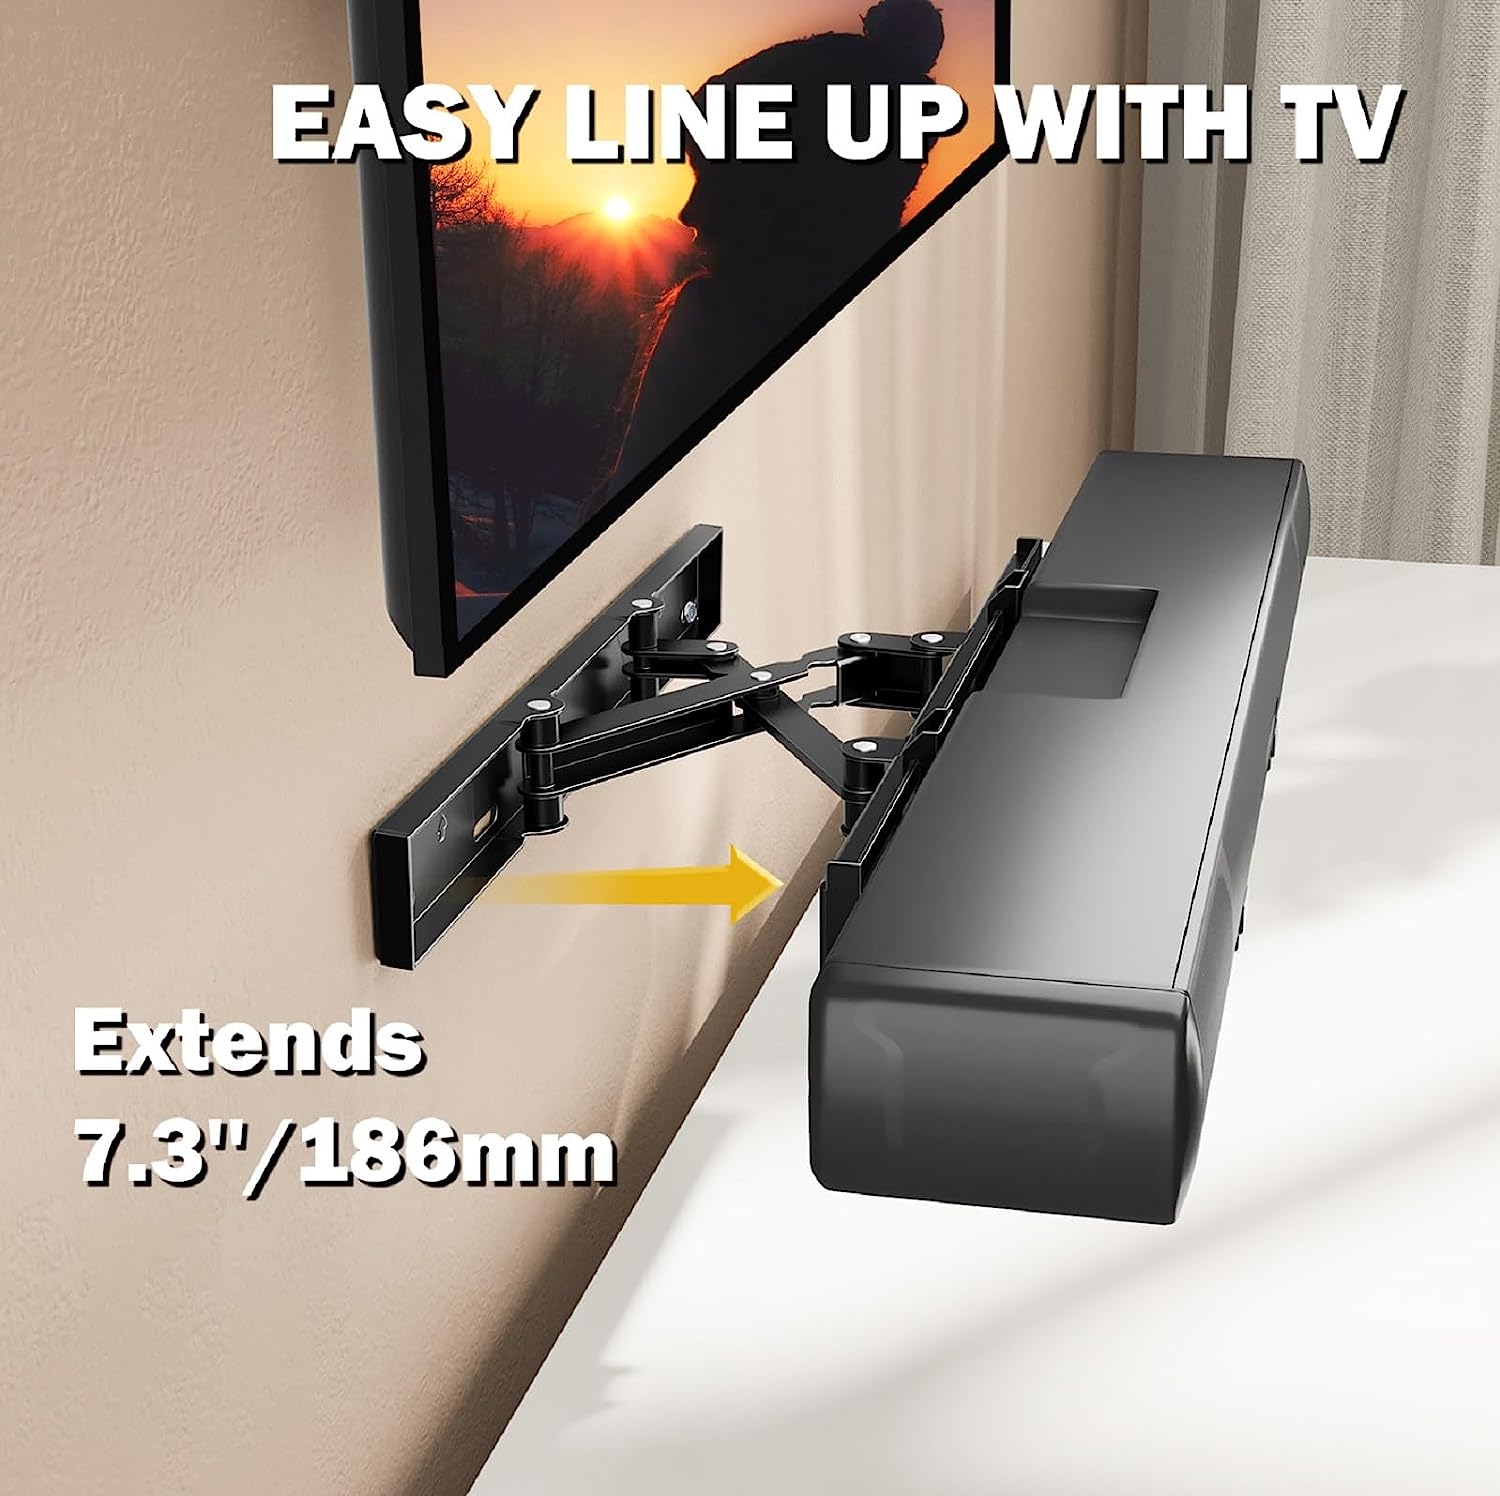 Mounting Dream Universal Soundbar Wall Mount with up to 7.3 inch Extension, Sound Bar Mount Bracket for Mounting Under or Above TV, Fits Most Soundbars up to 17.5LBS, MD5432